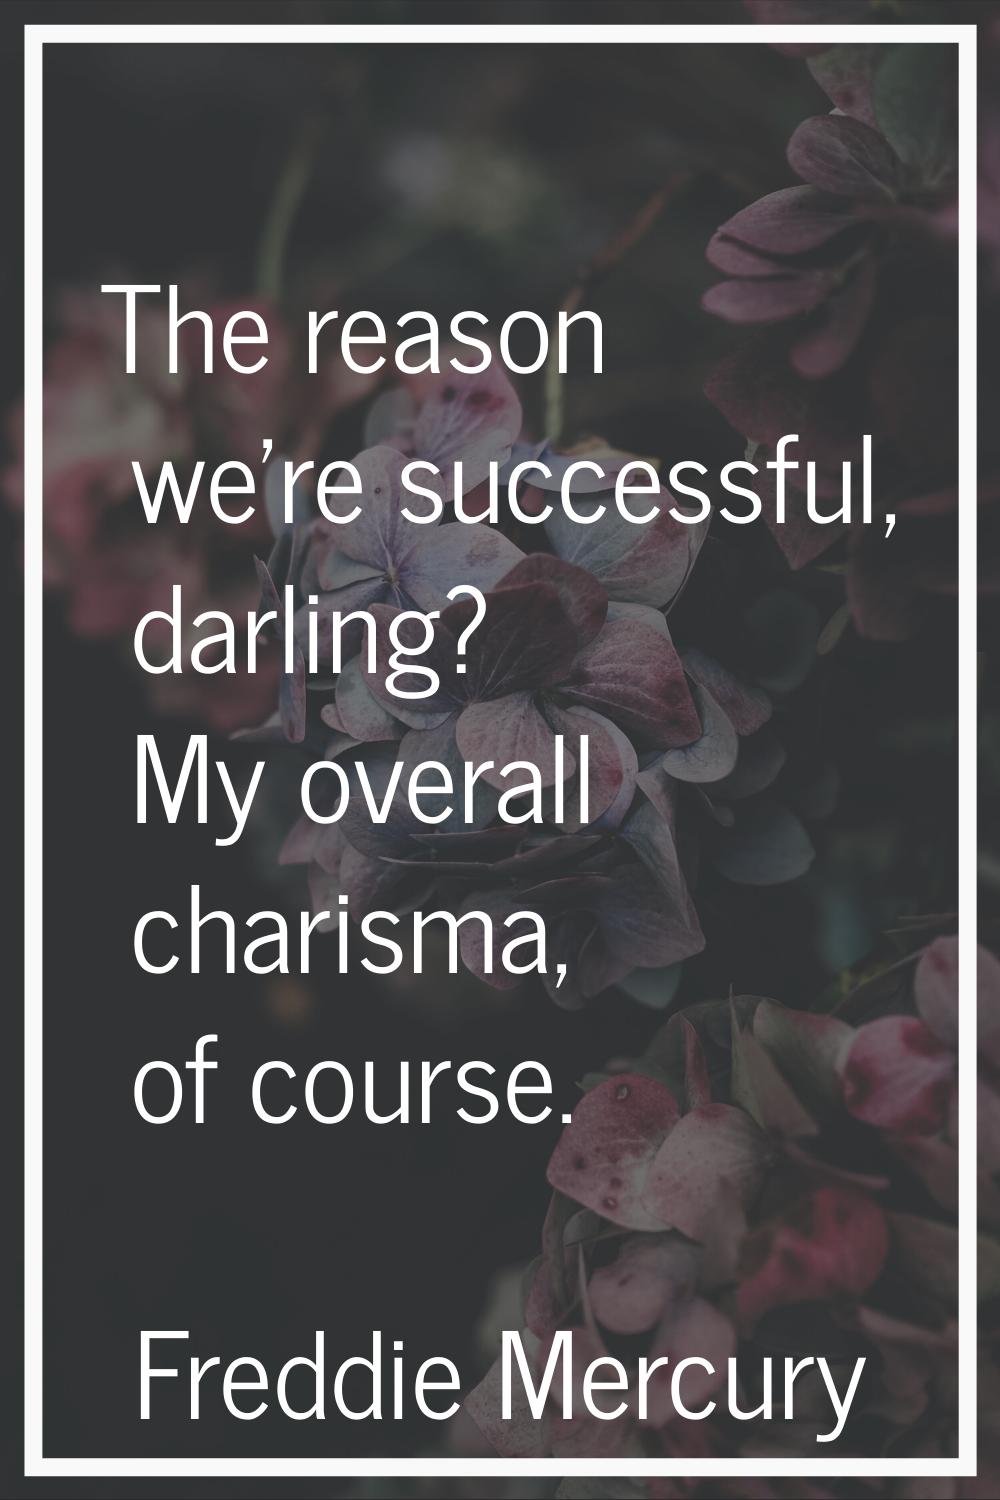 The reason we're successful, darling? My overall charisma, of course.